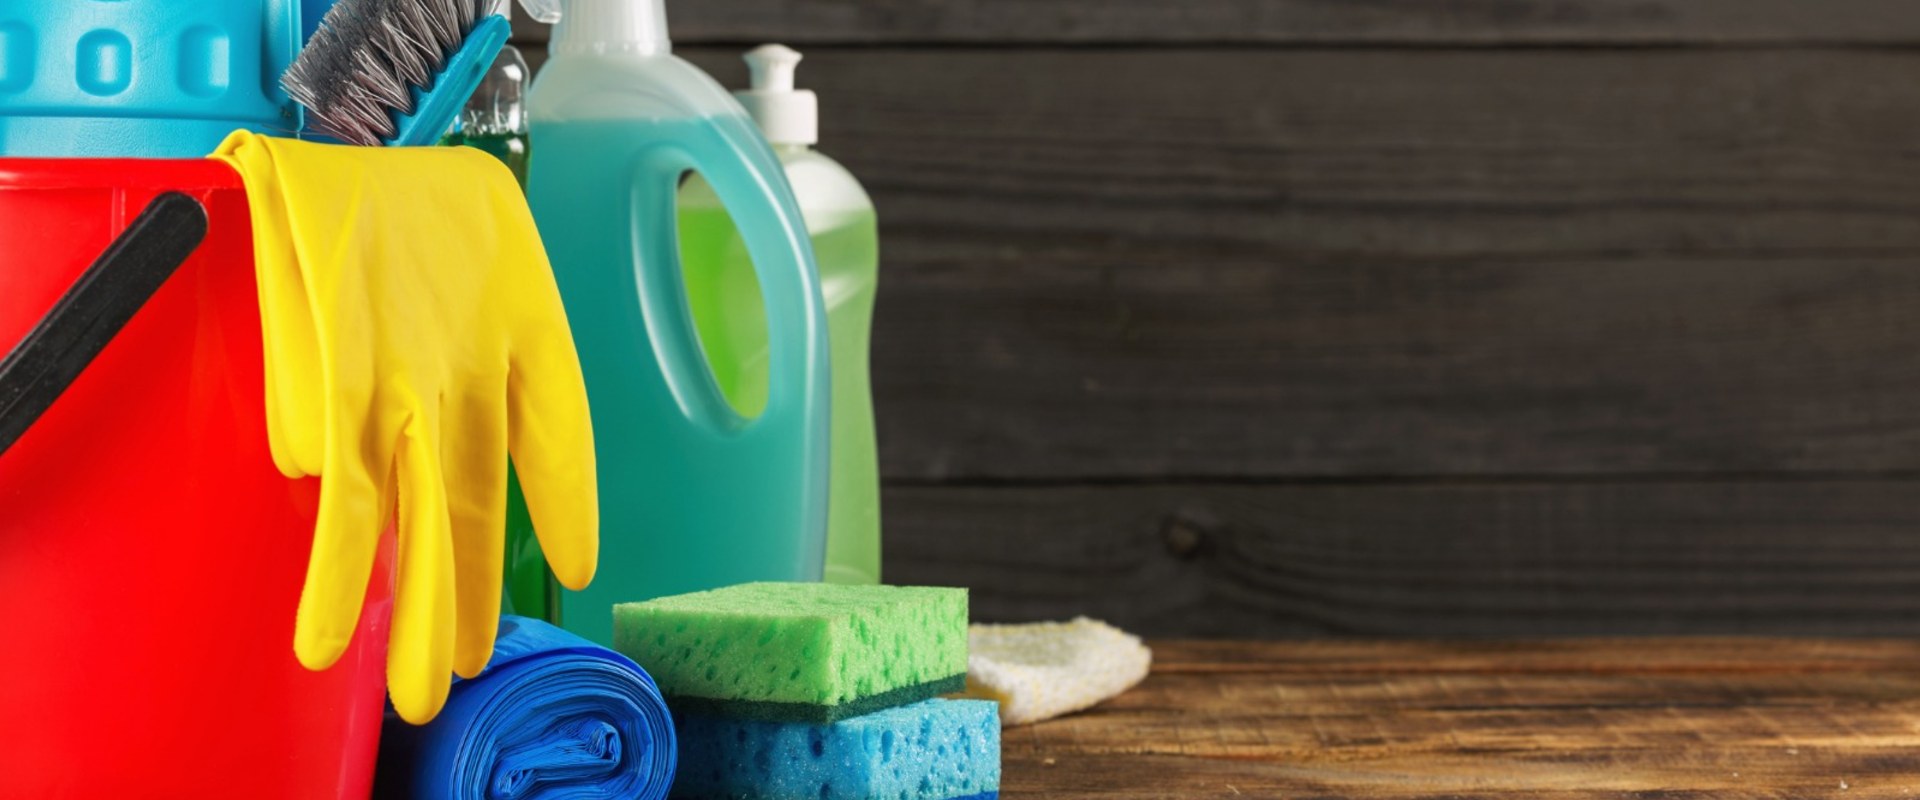 What are the 3 cleaning agents?